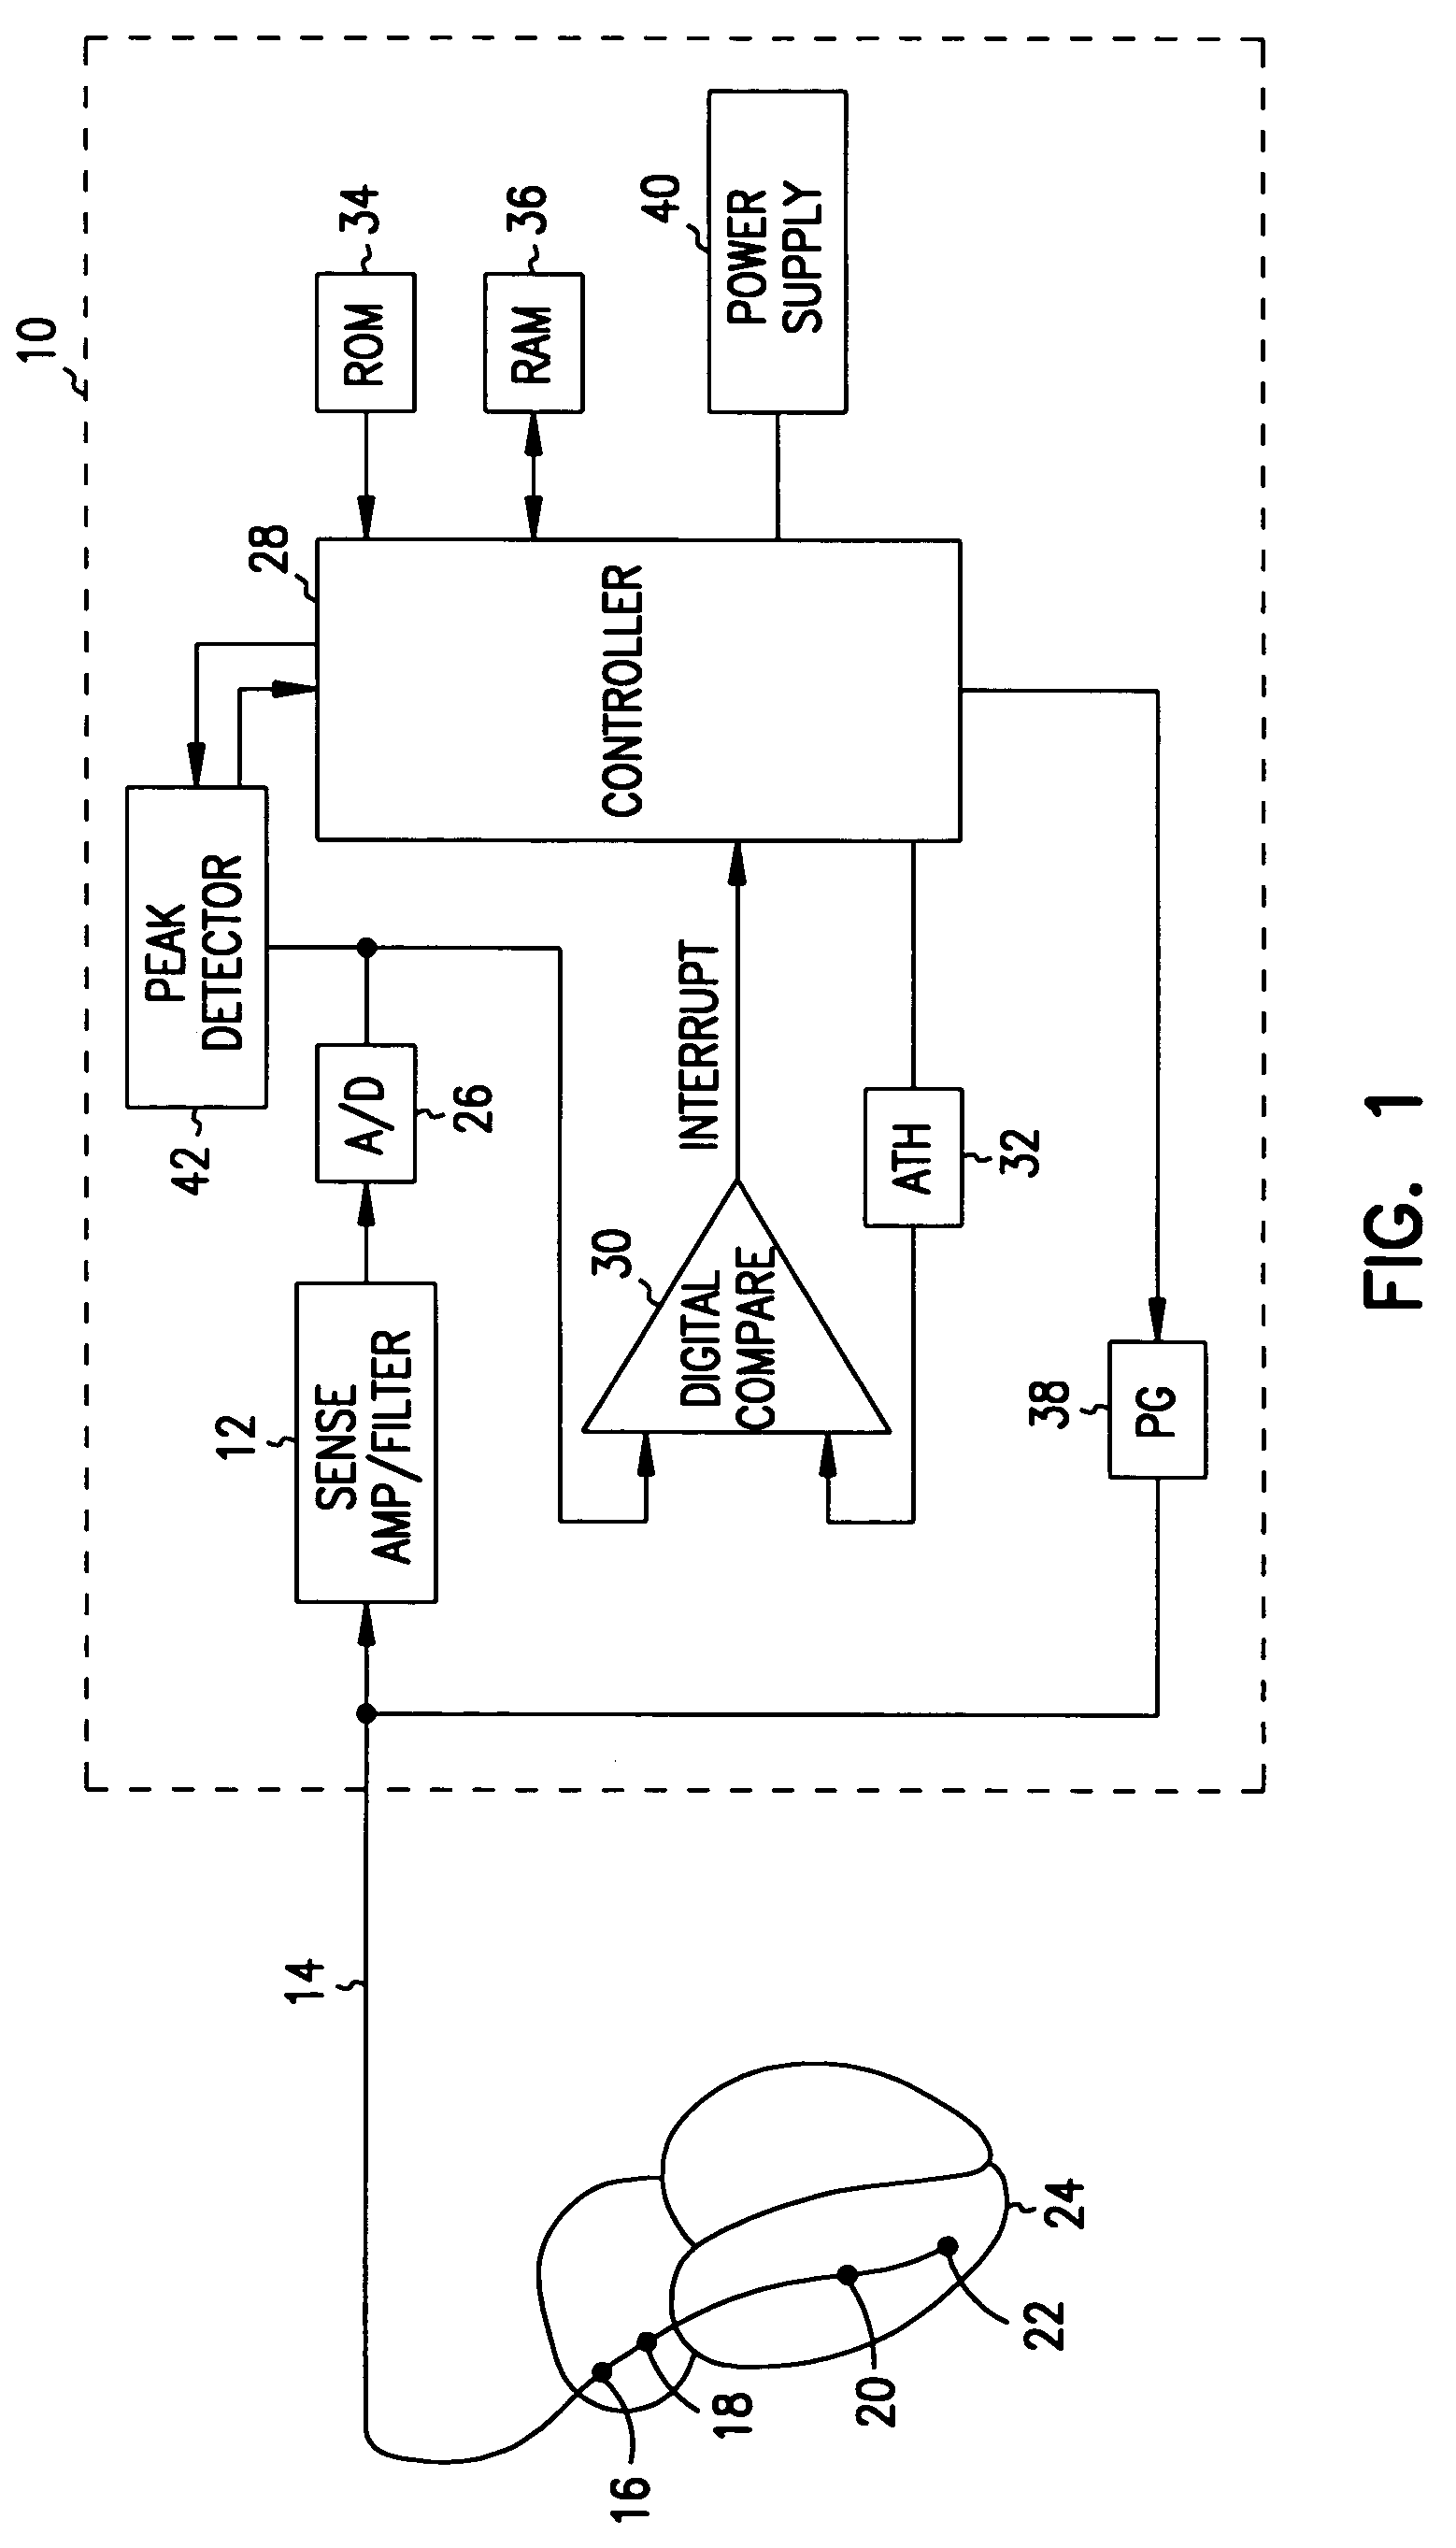 Method and apparatus for adjusting the sensing threshold of a cardiac rhythm management device